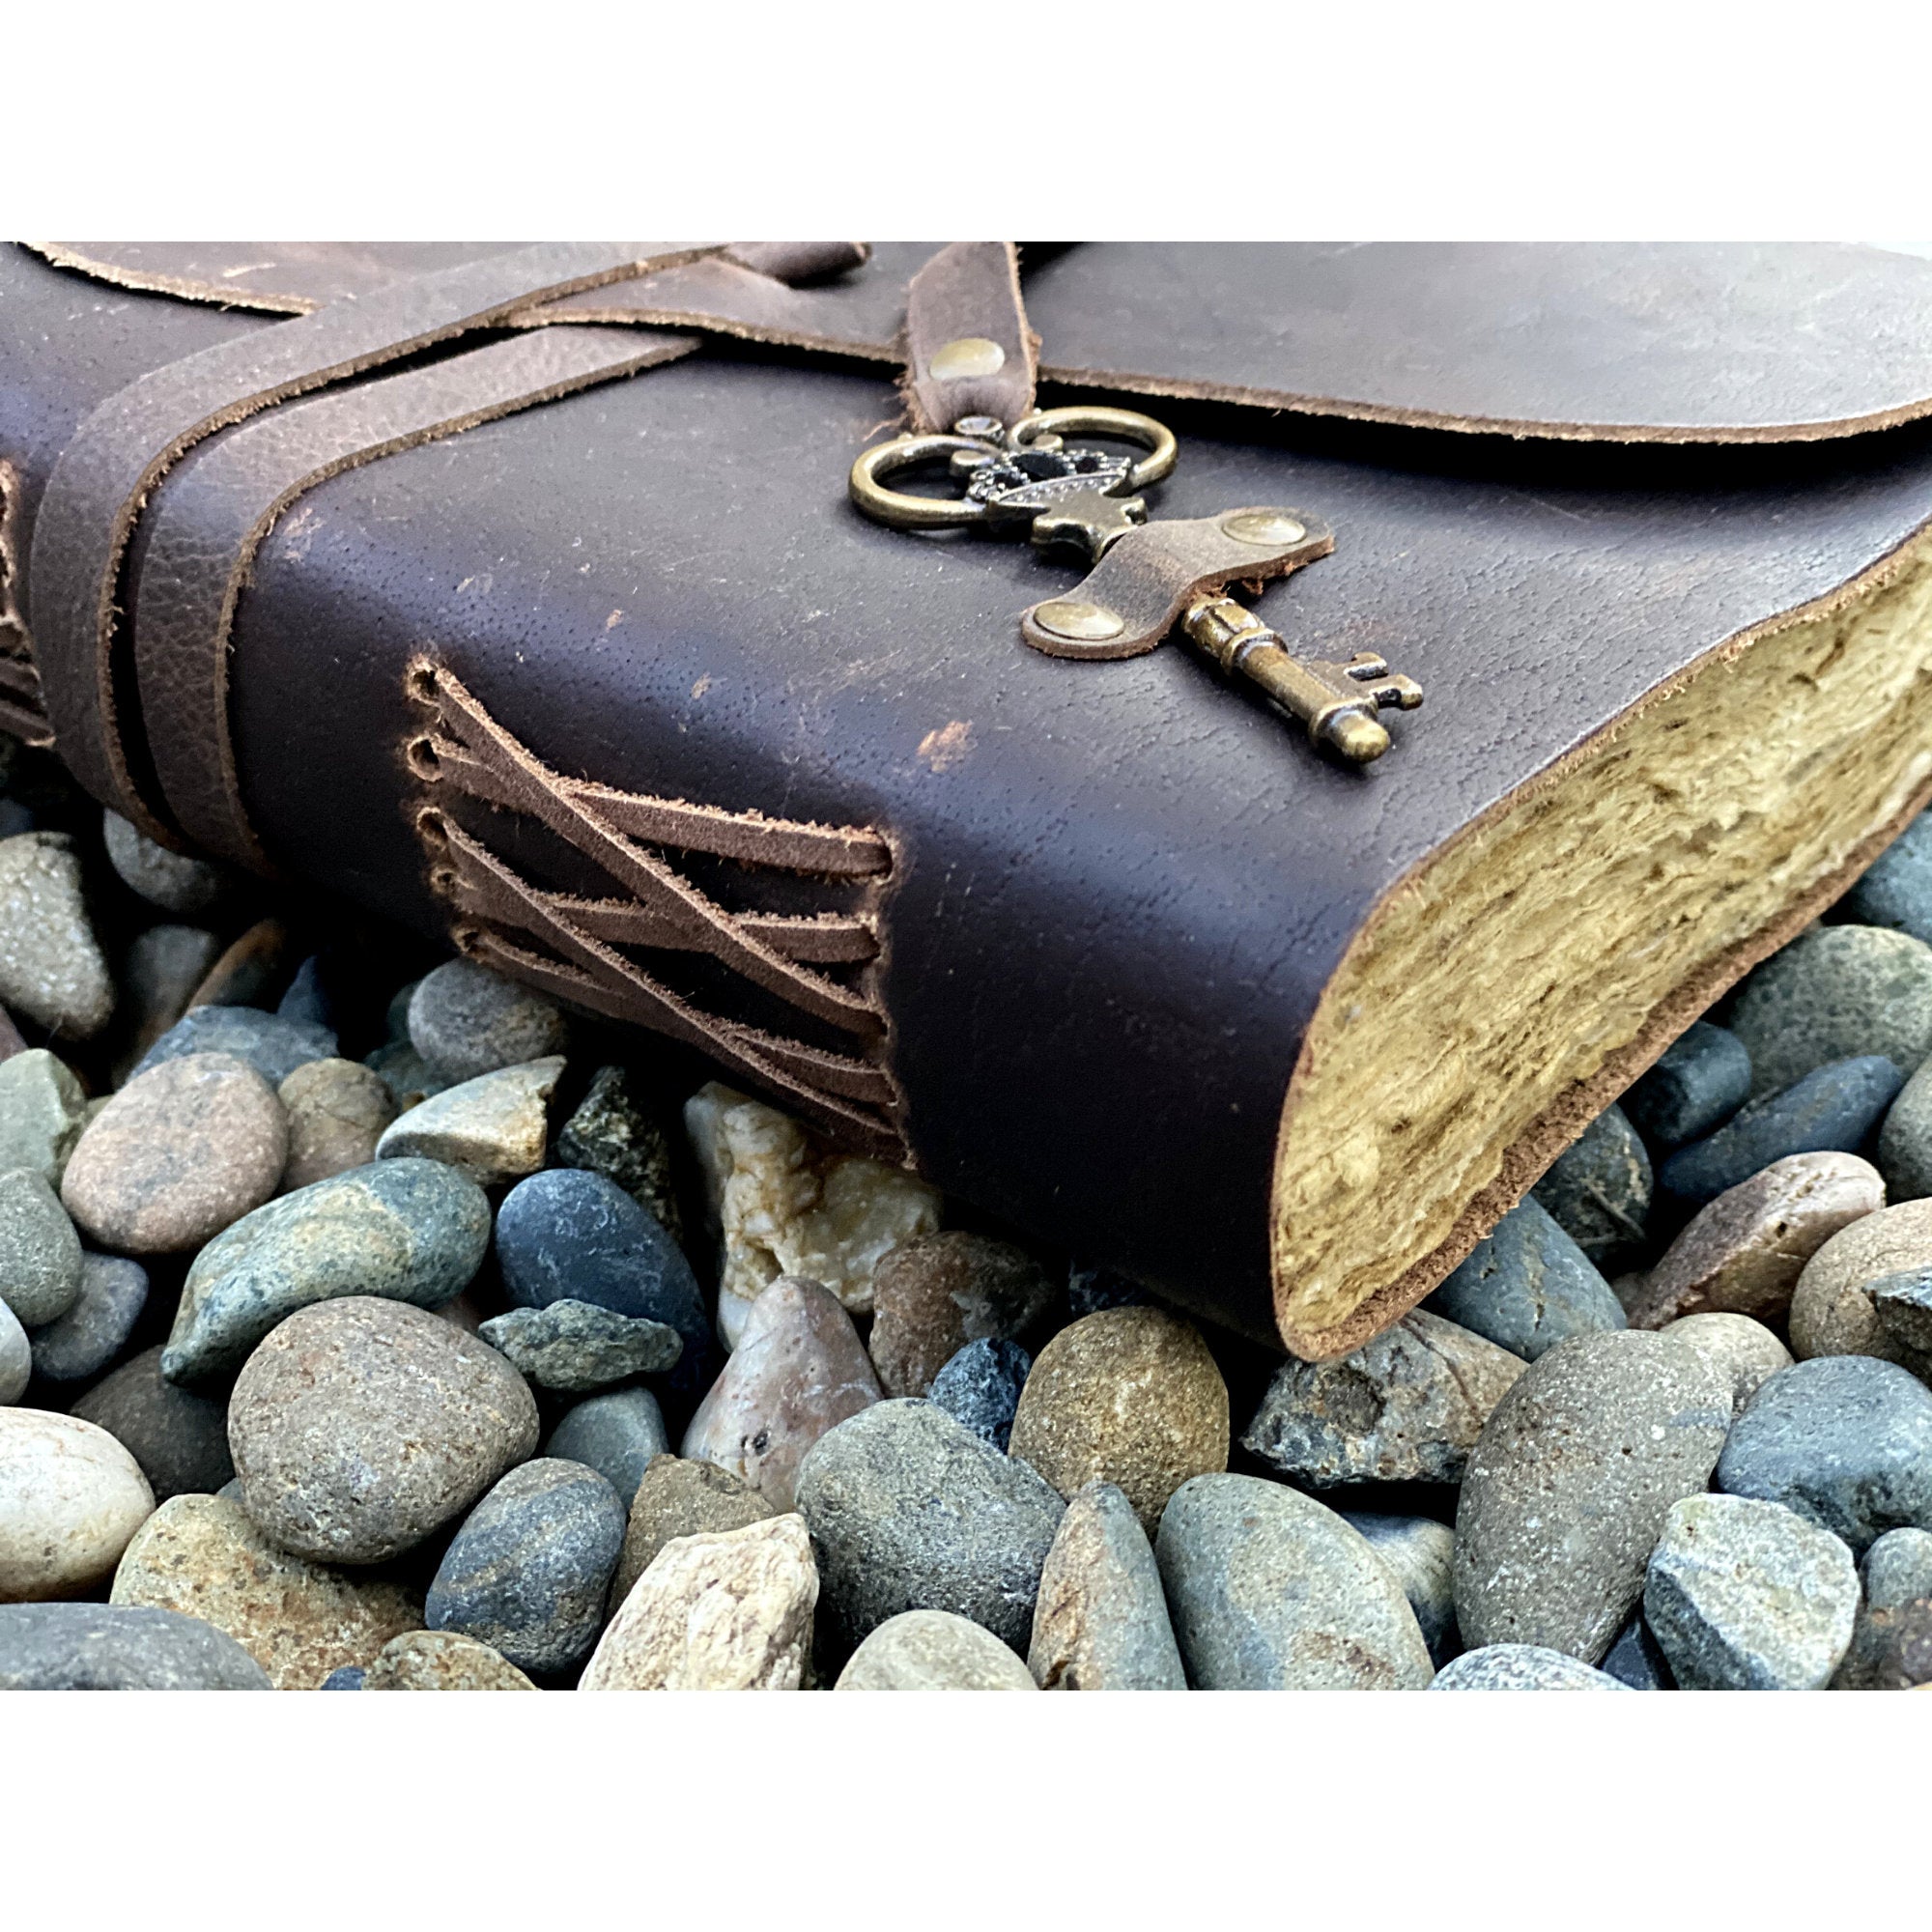 NomadCraftsCo. Vintage Leather Journal Lined Pages with Key - Antique Handmade Deckle Edge Vintage Paper Leather Bound Journal - Book of Sha